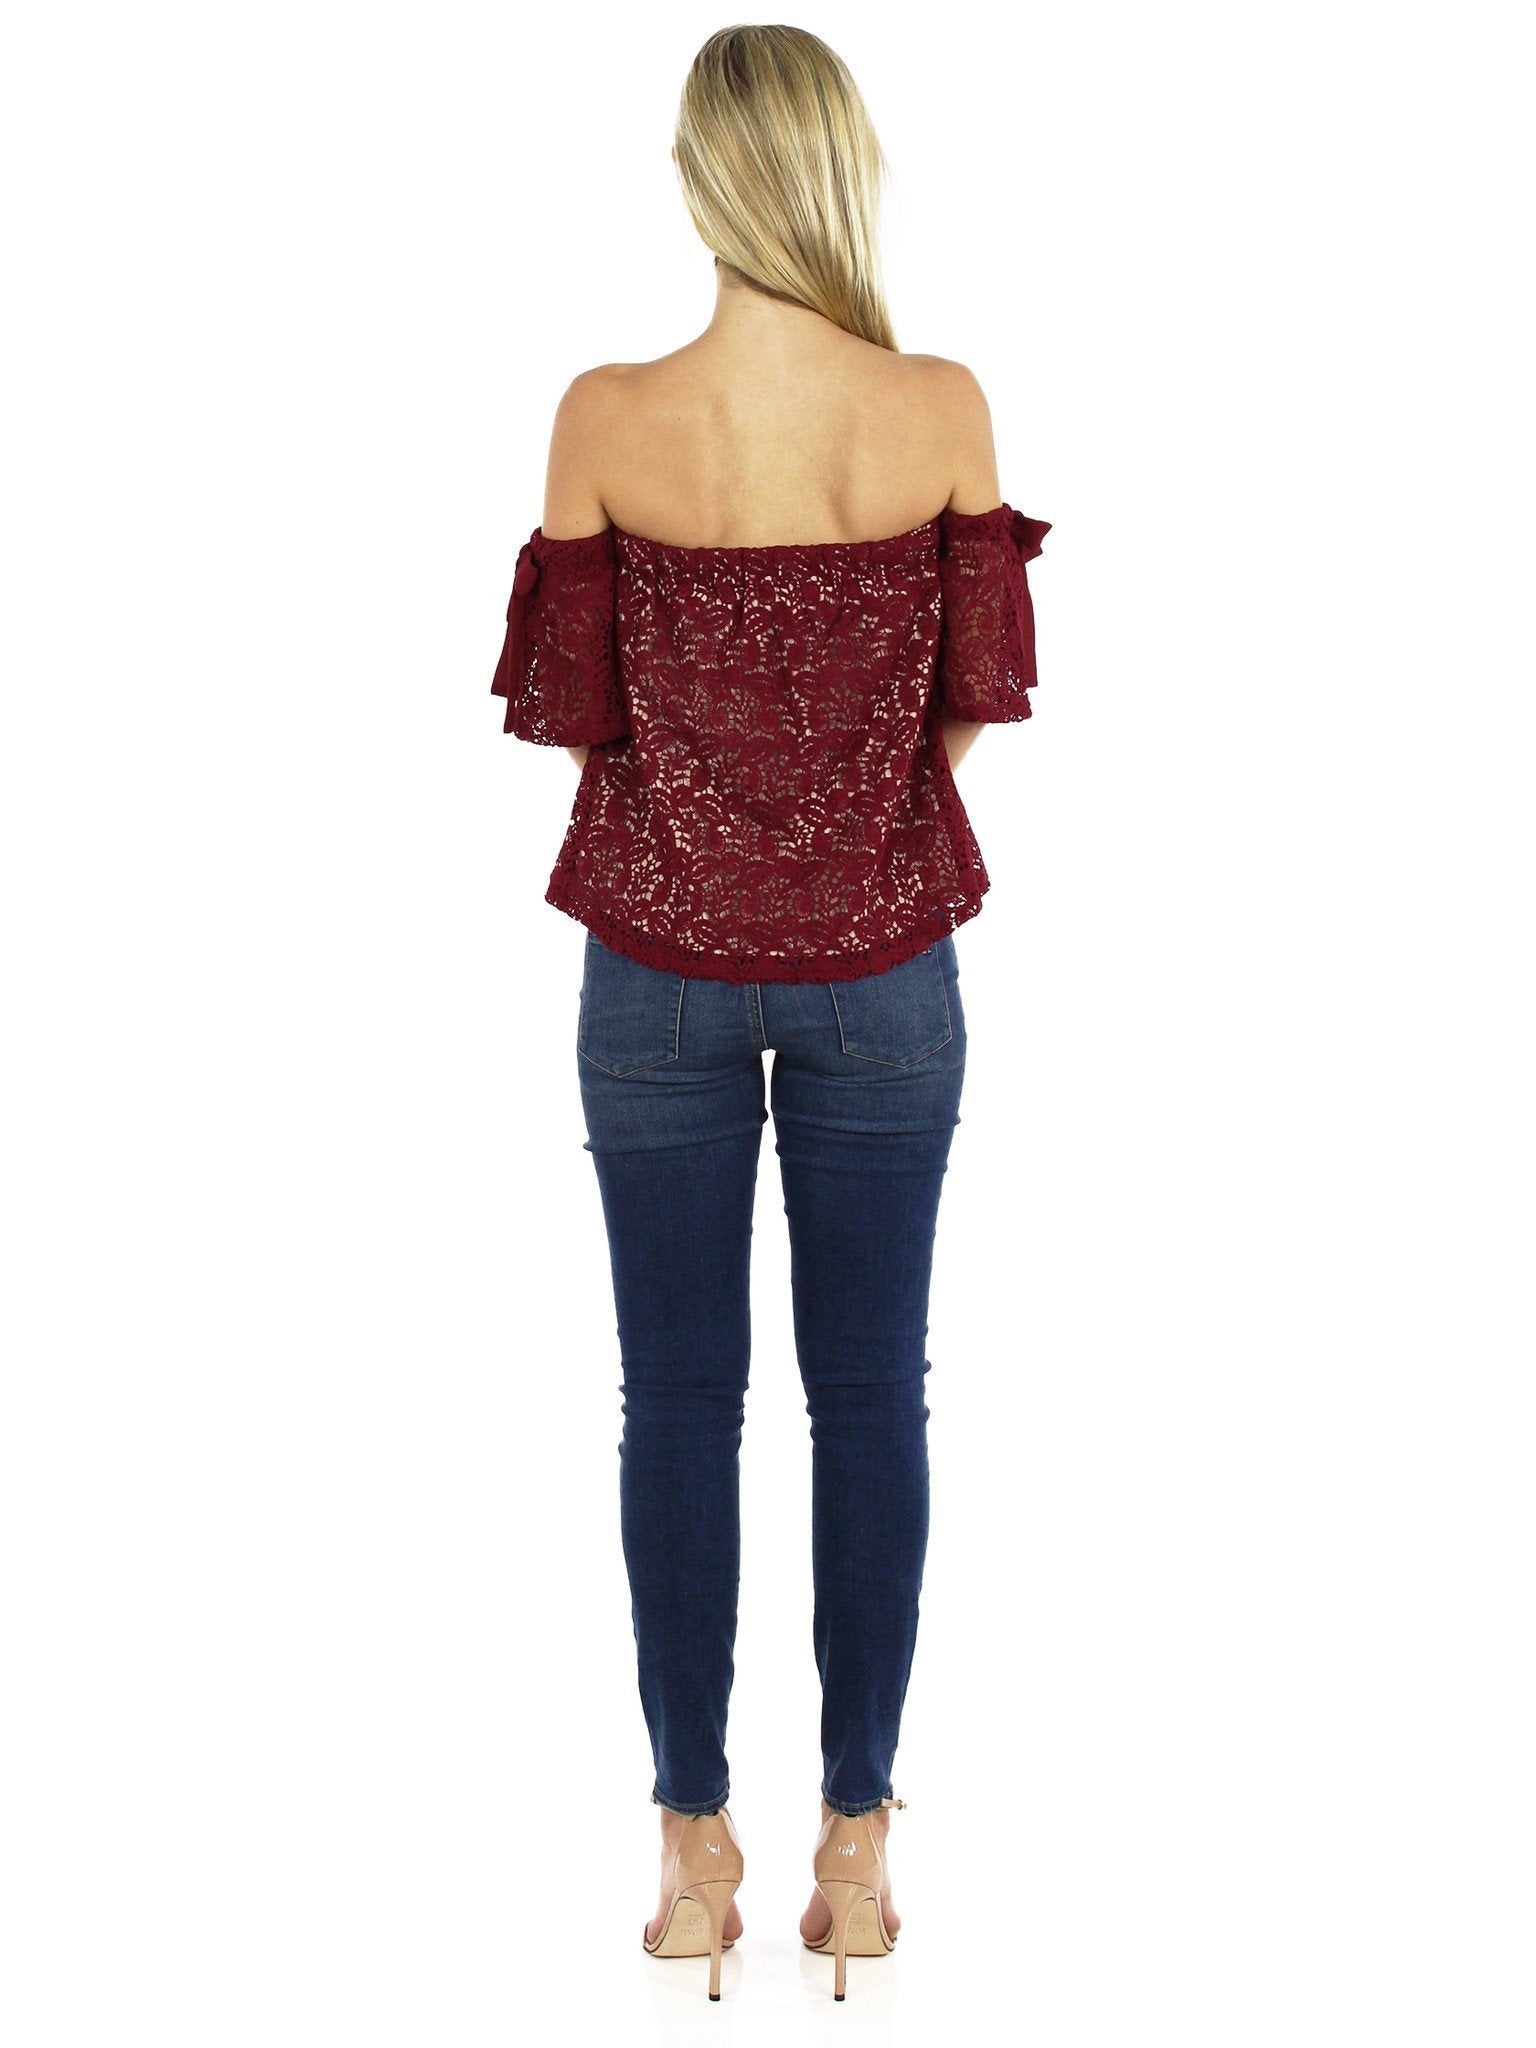 Girl wearing a top rental from Moon River called Off Shoulder Lace Top